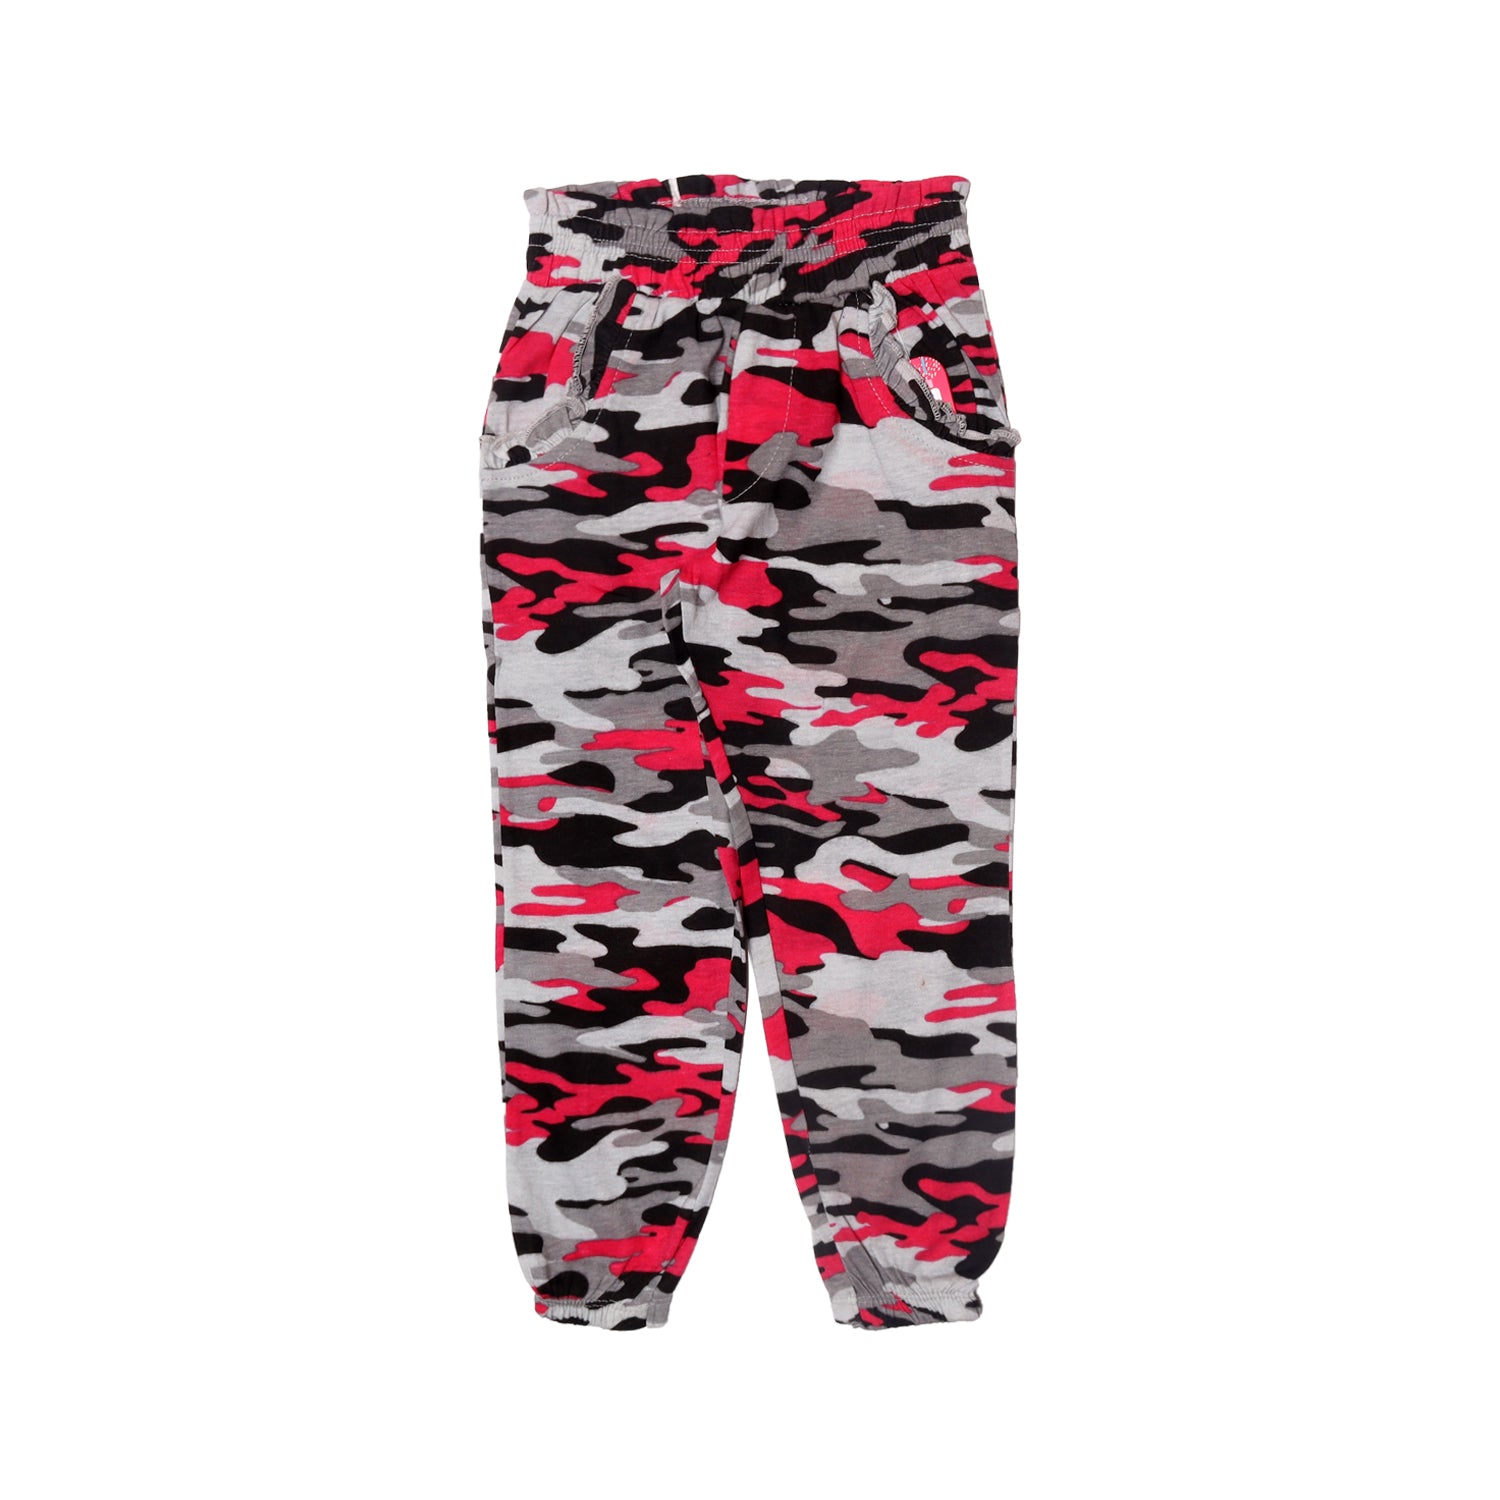 GREY & PINK CAMOUFLAGE PRINTED FRIL POCKETS PAJAMA FOR GIRLS